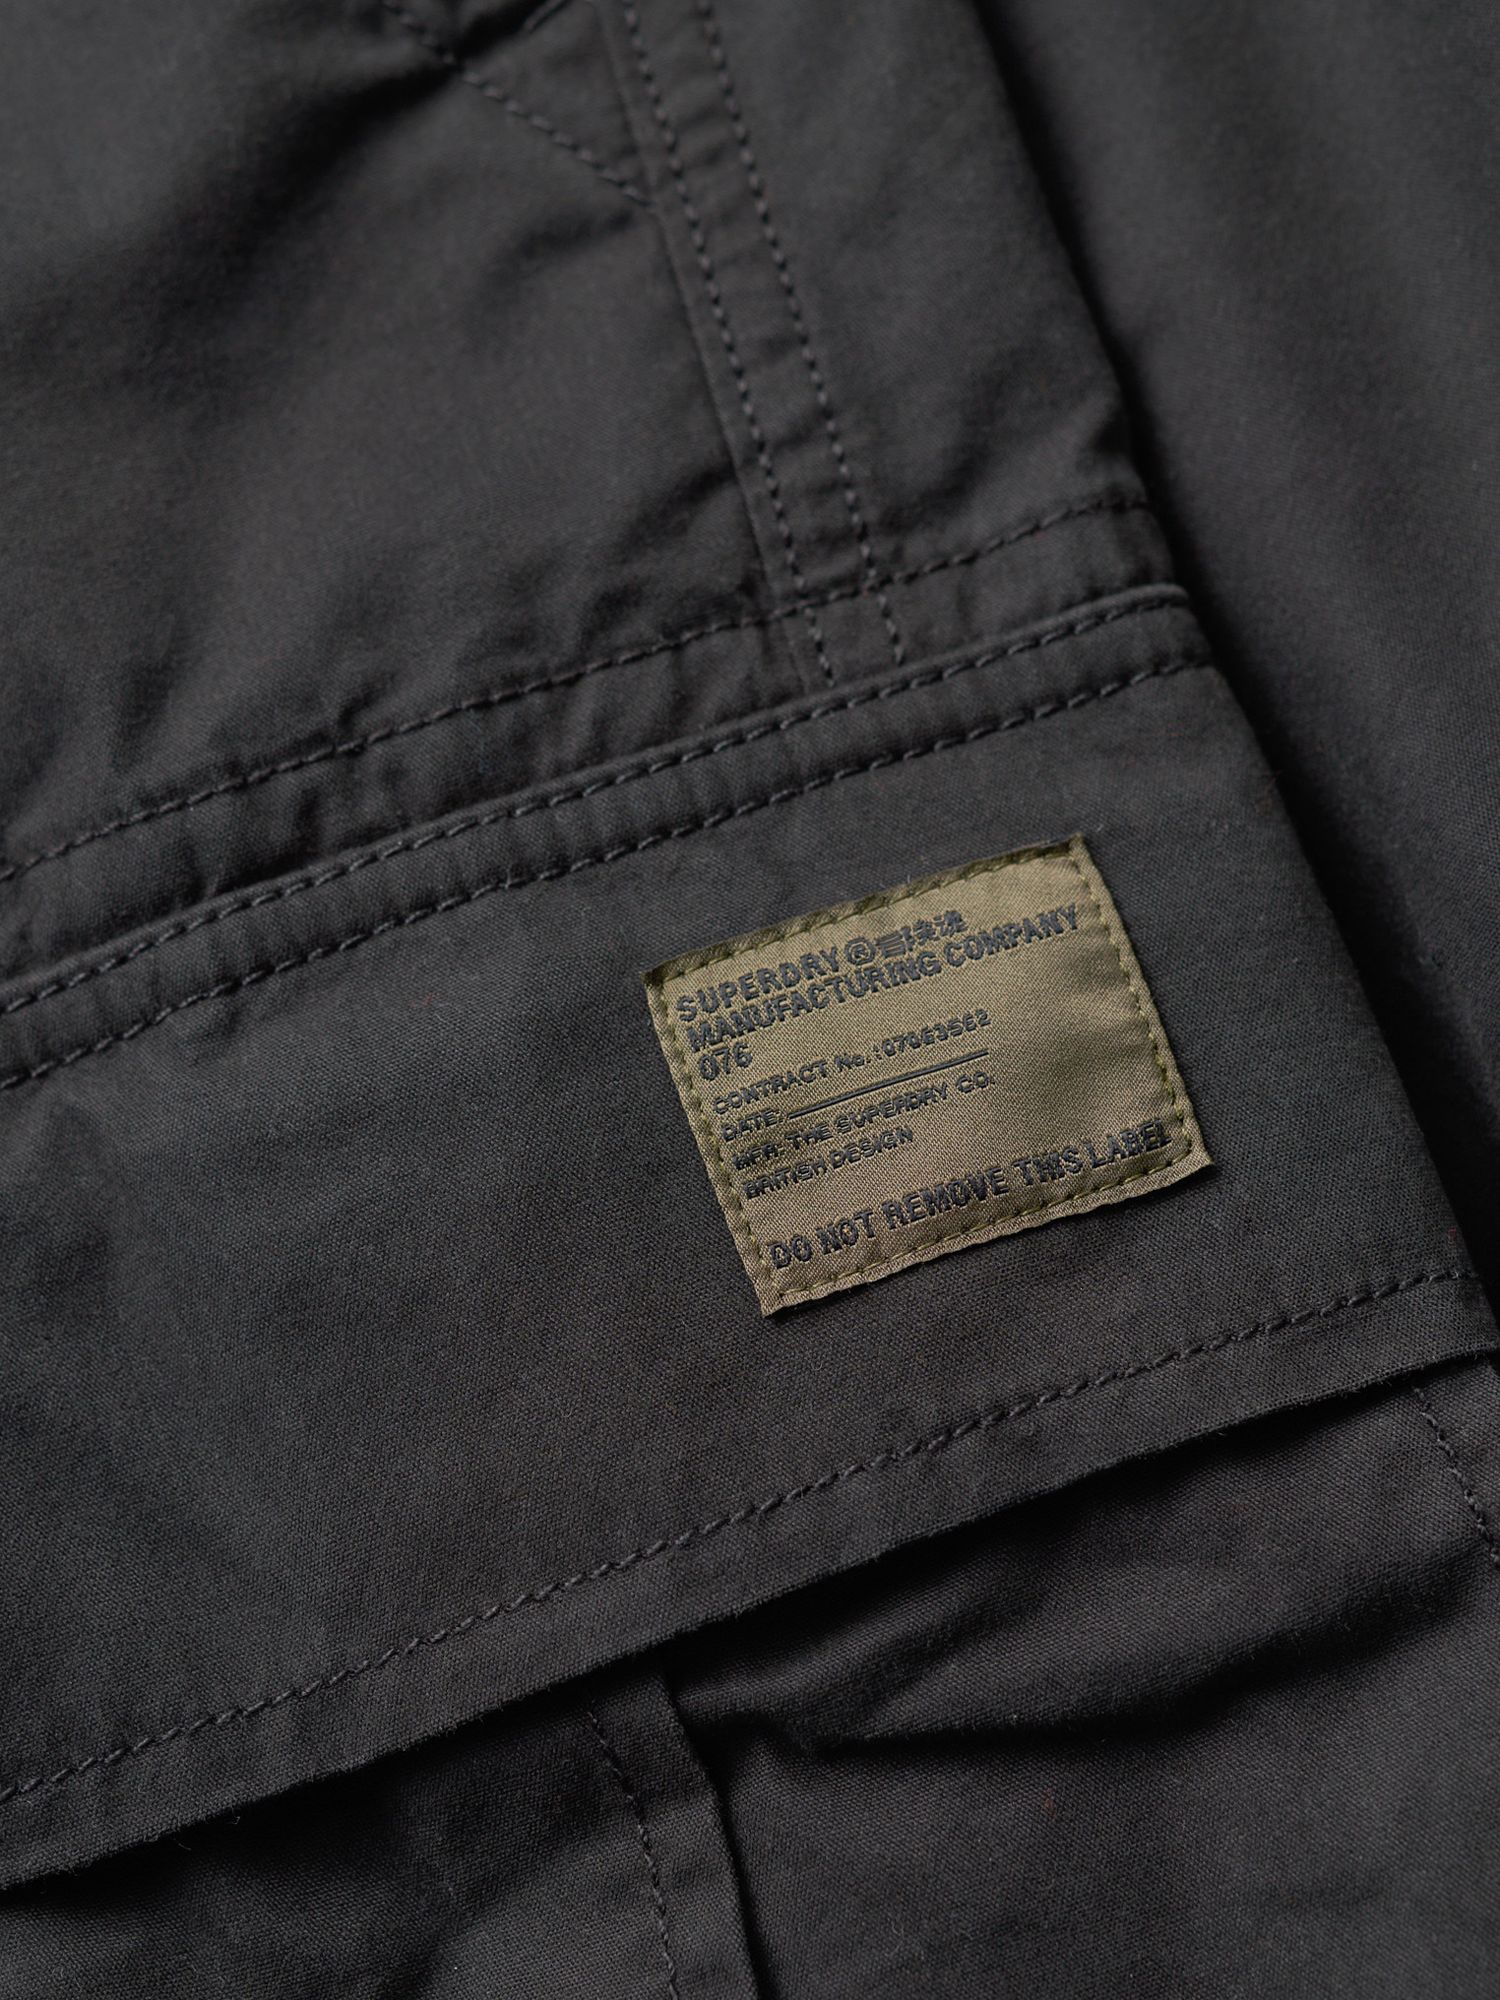 Superdry Cotton Cargo Trousers, Black at John Lewis & Partners